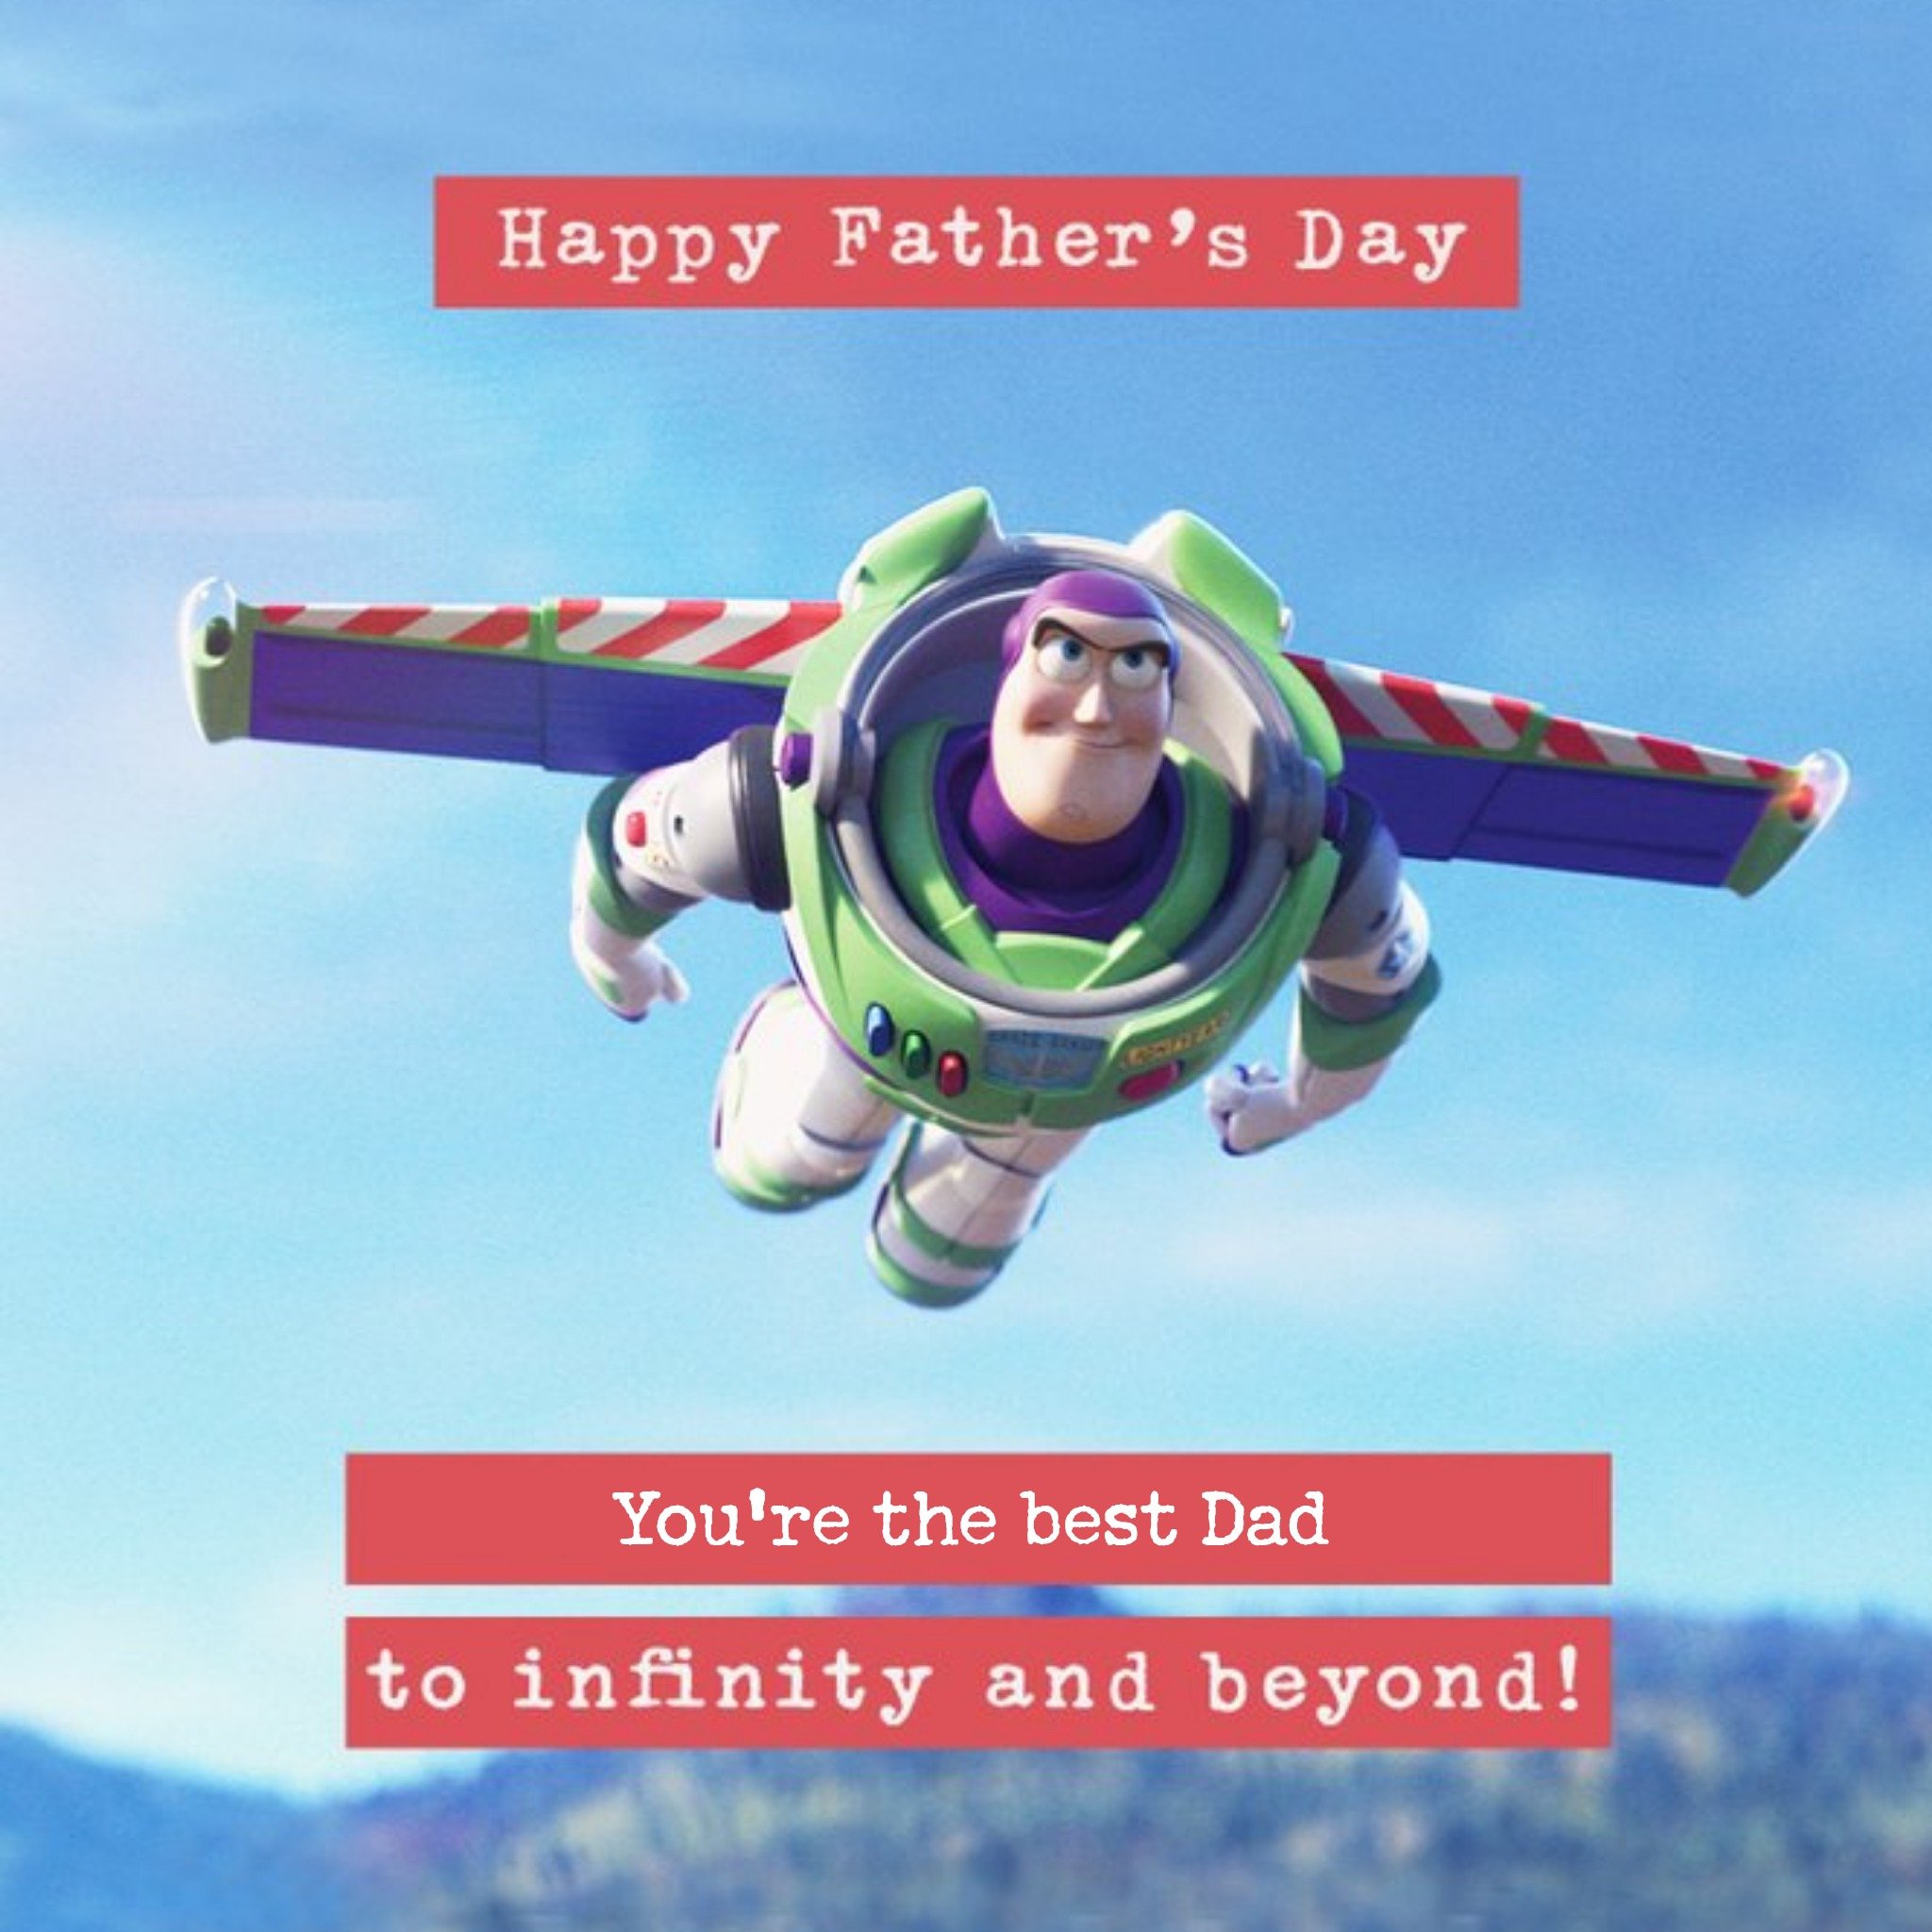 Disney Toy Story 4 - Father's Day Card - To Infinity And Beyond, Large